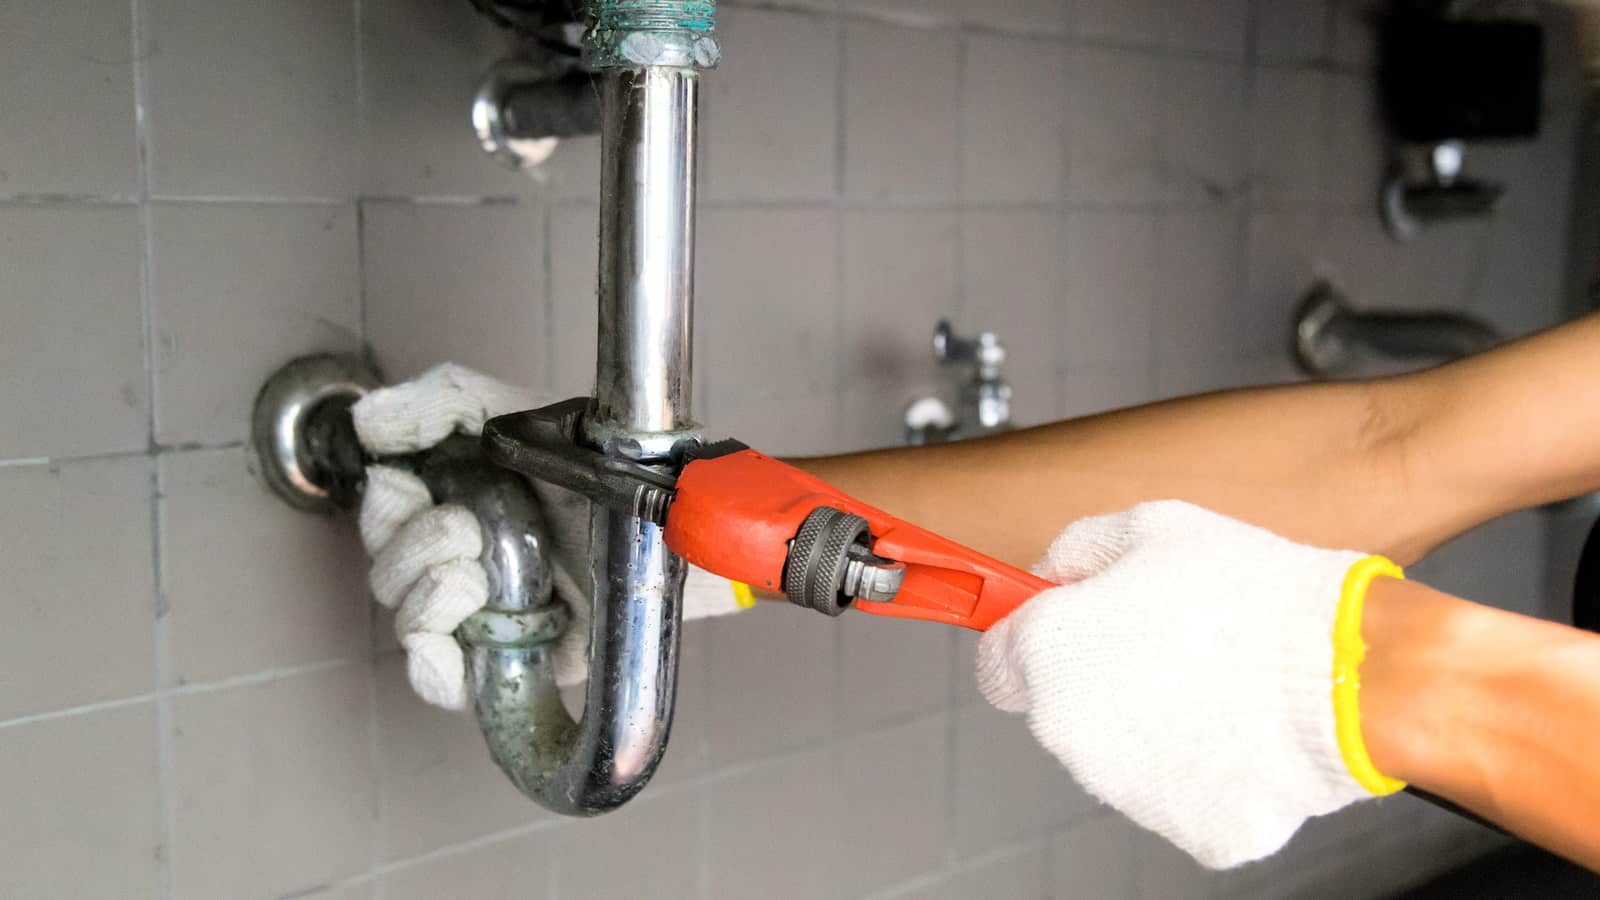 QuickFix Emergency Plumbing and Drains of Chicago